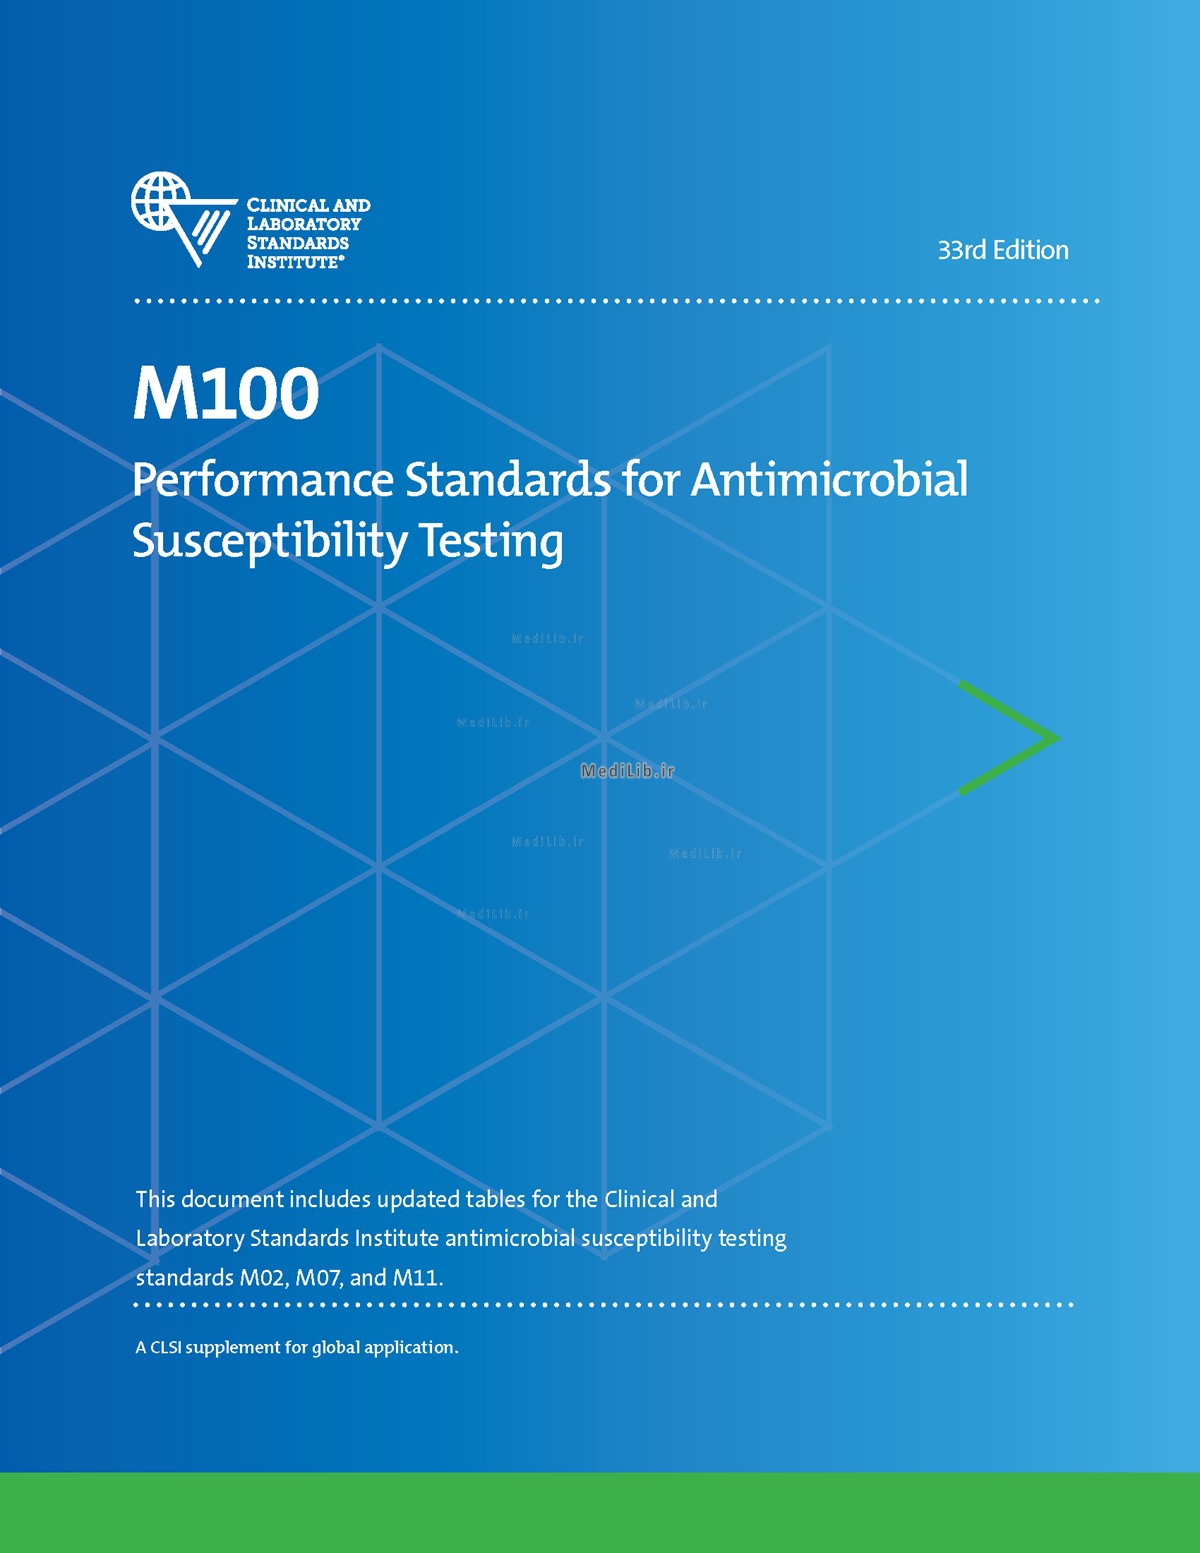 M100 PERFORMANCE STANDARDS FOR ANTIMICROBIAL SUSCEPTIBILITY TESTING, 33RD EDITION,M100ED33